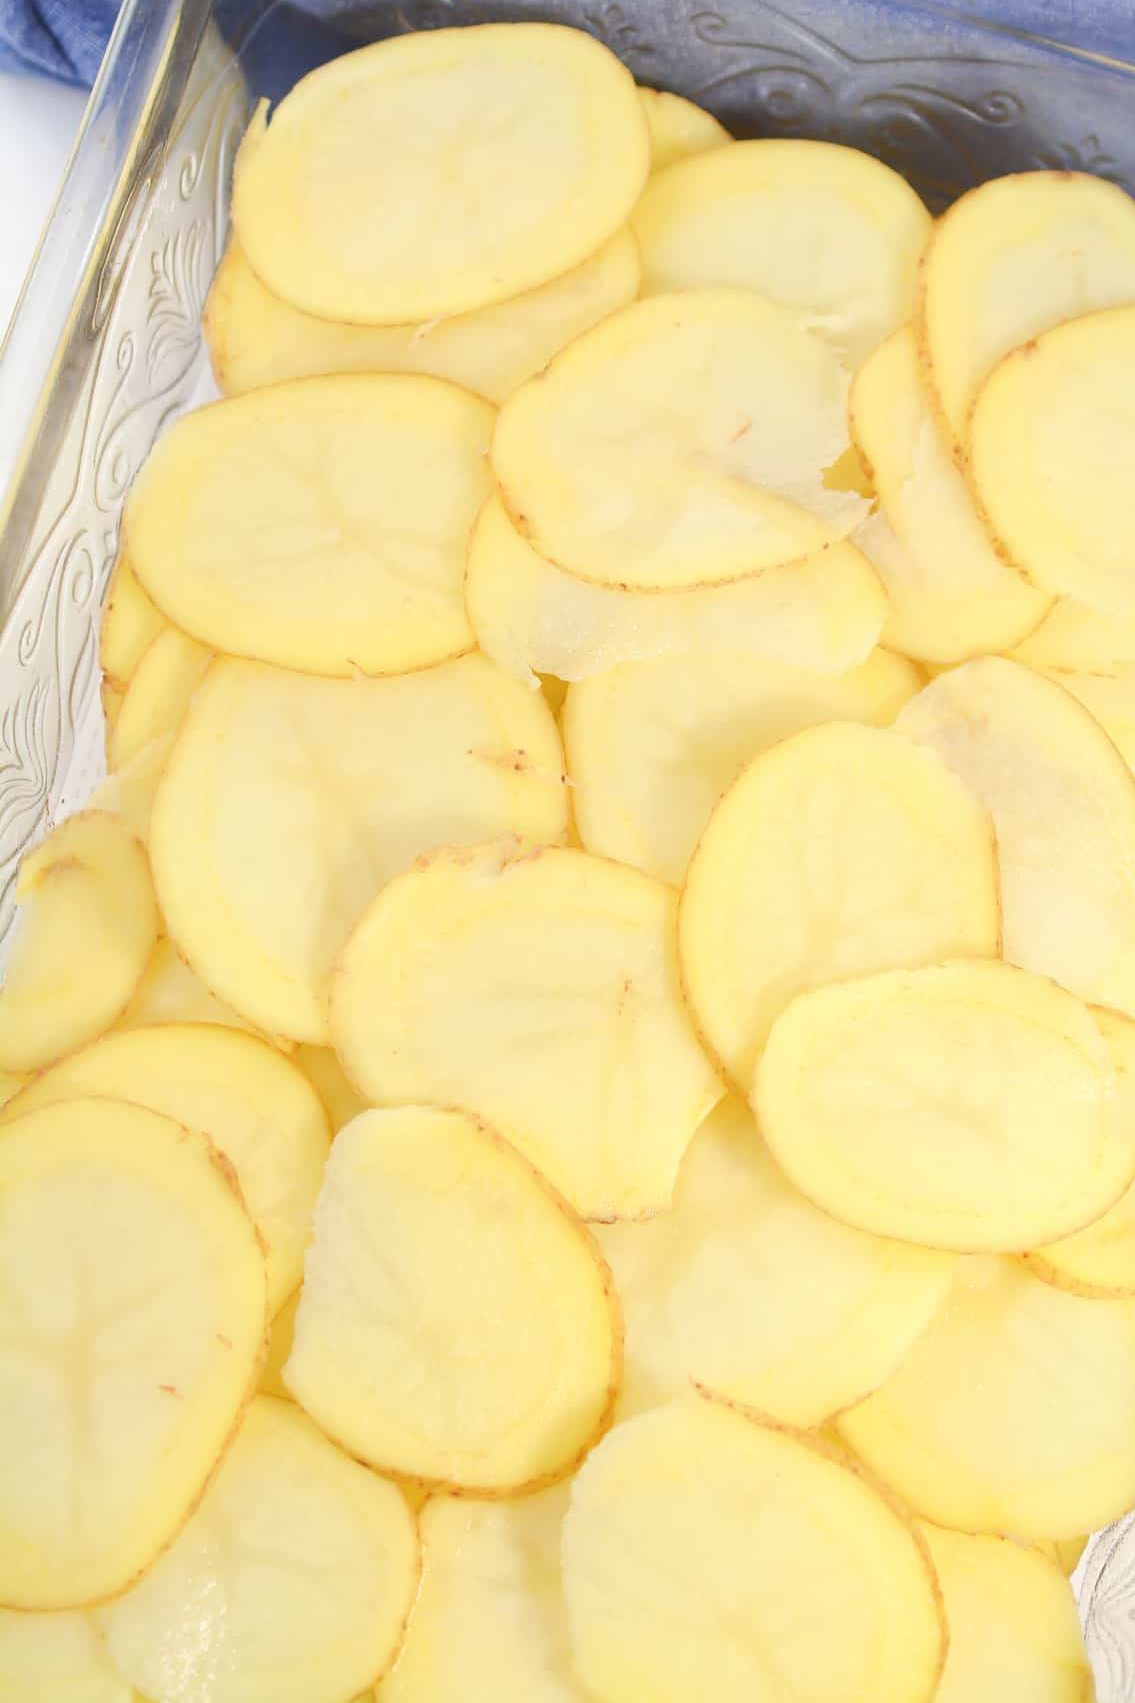 Layer the potatoes on the bottom of a well-greased 9x13 baking dish.